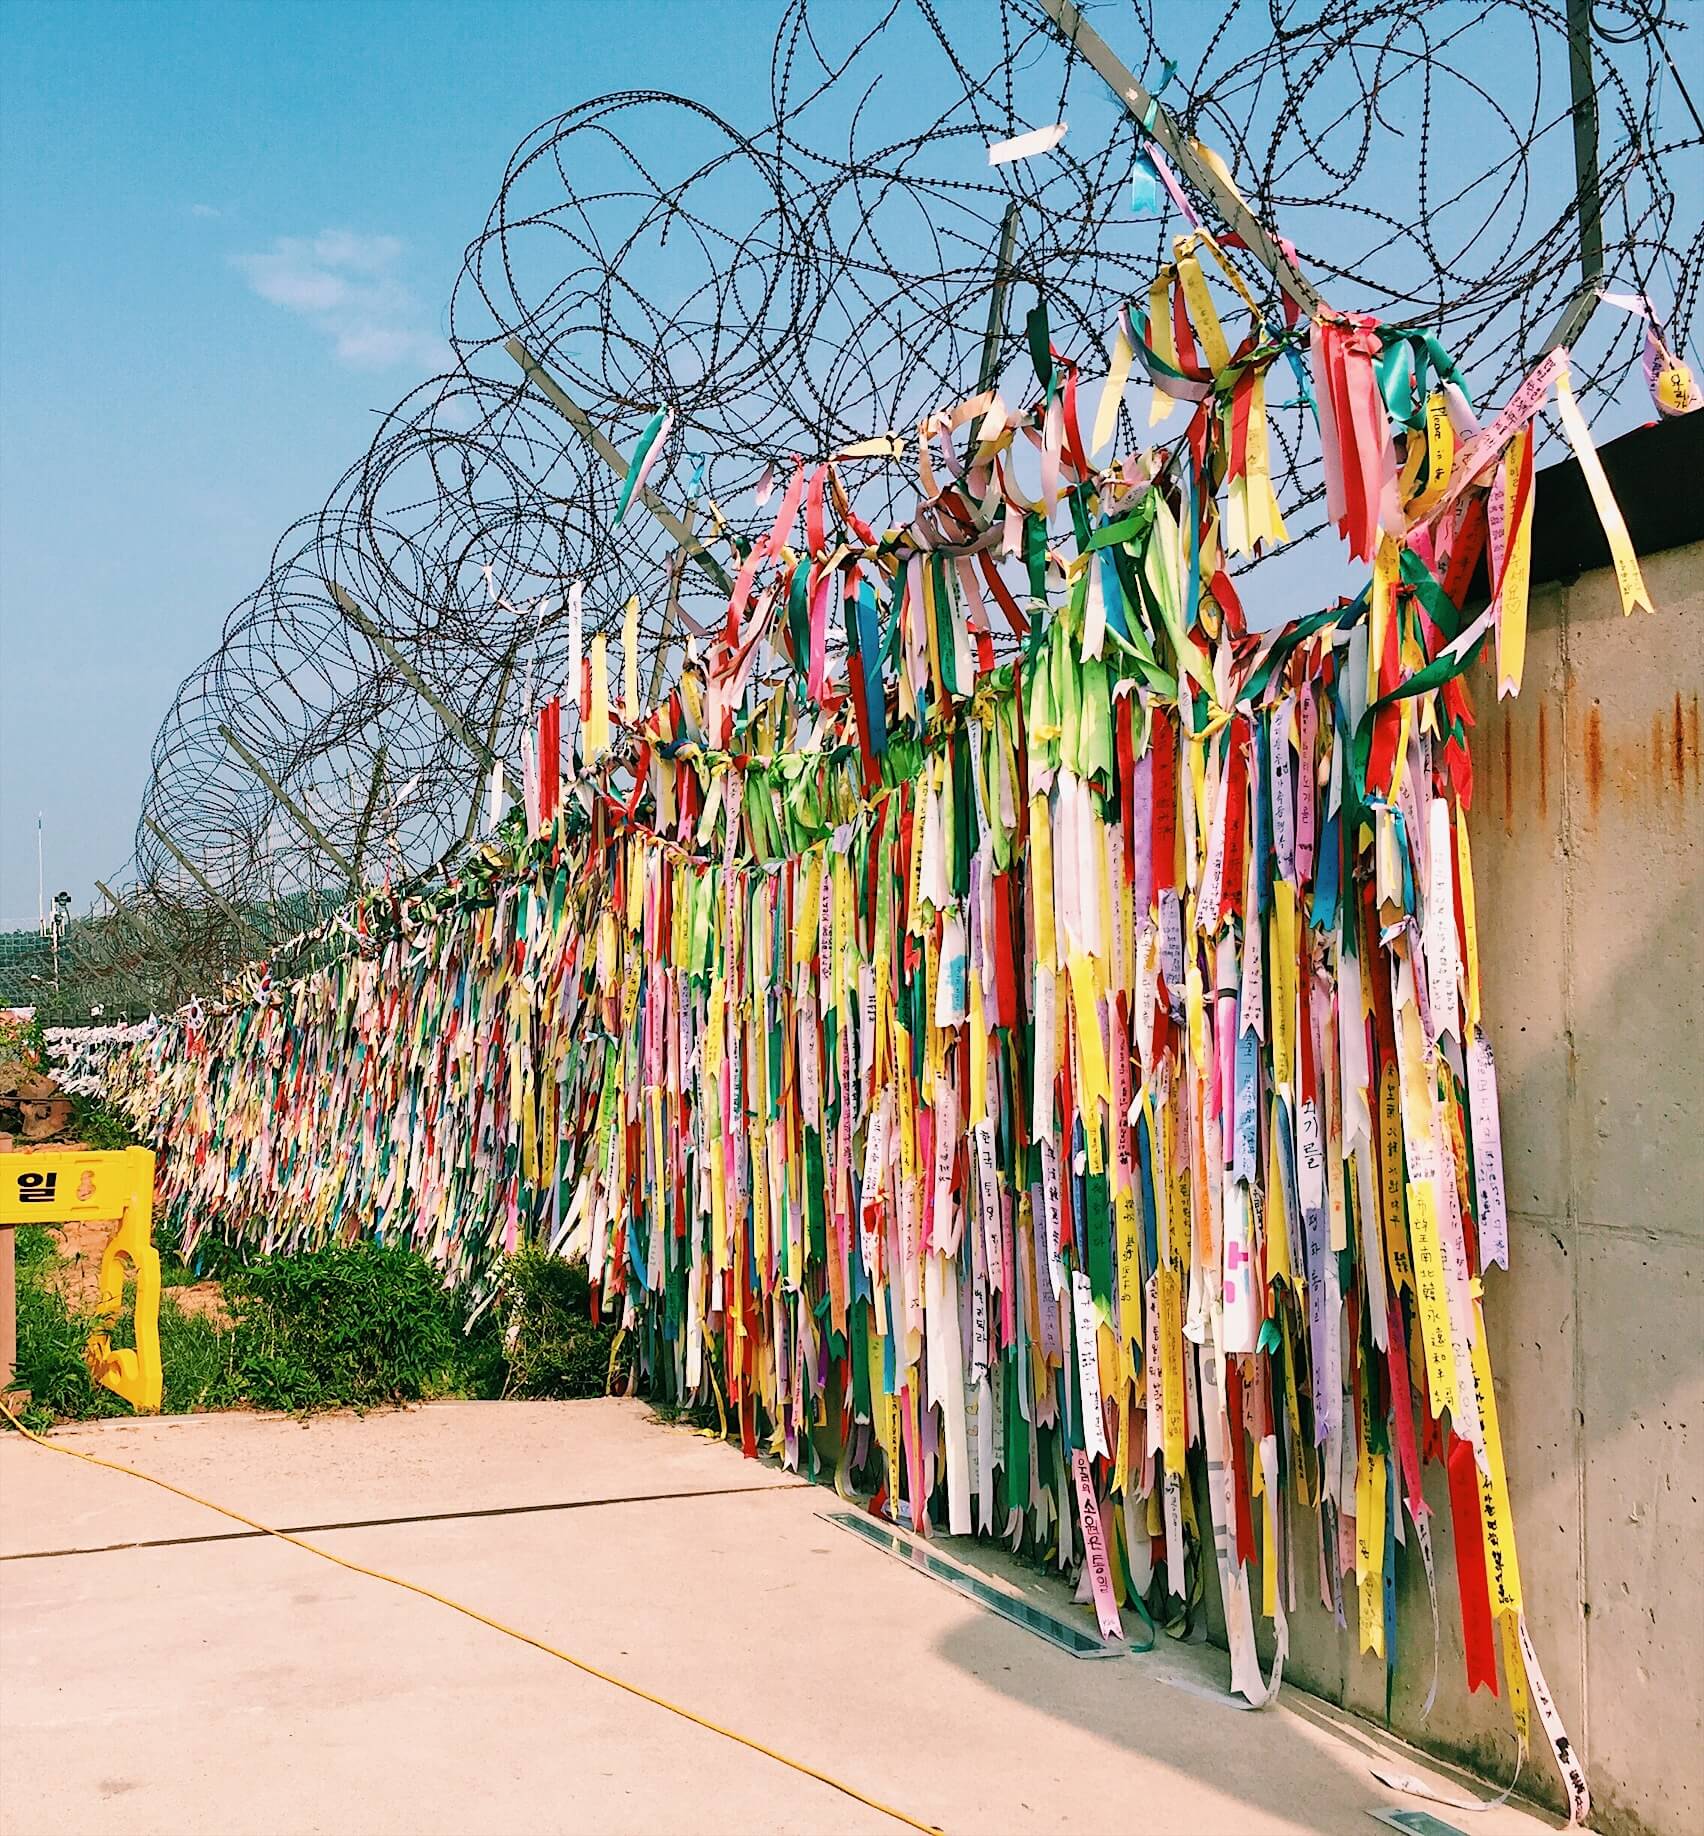 A barbed-wire fence with thousands
              of colored ribbons tied onto it.